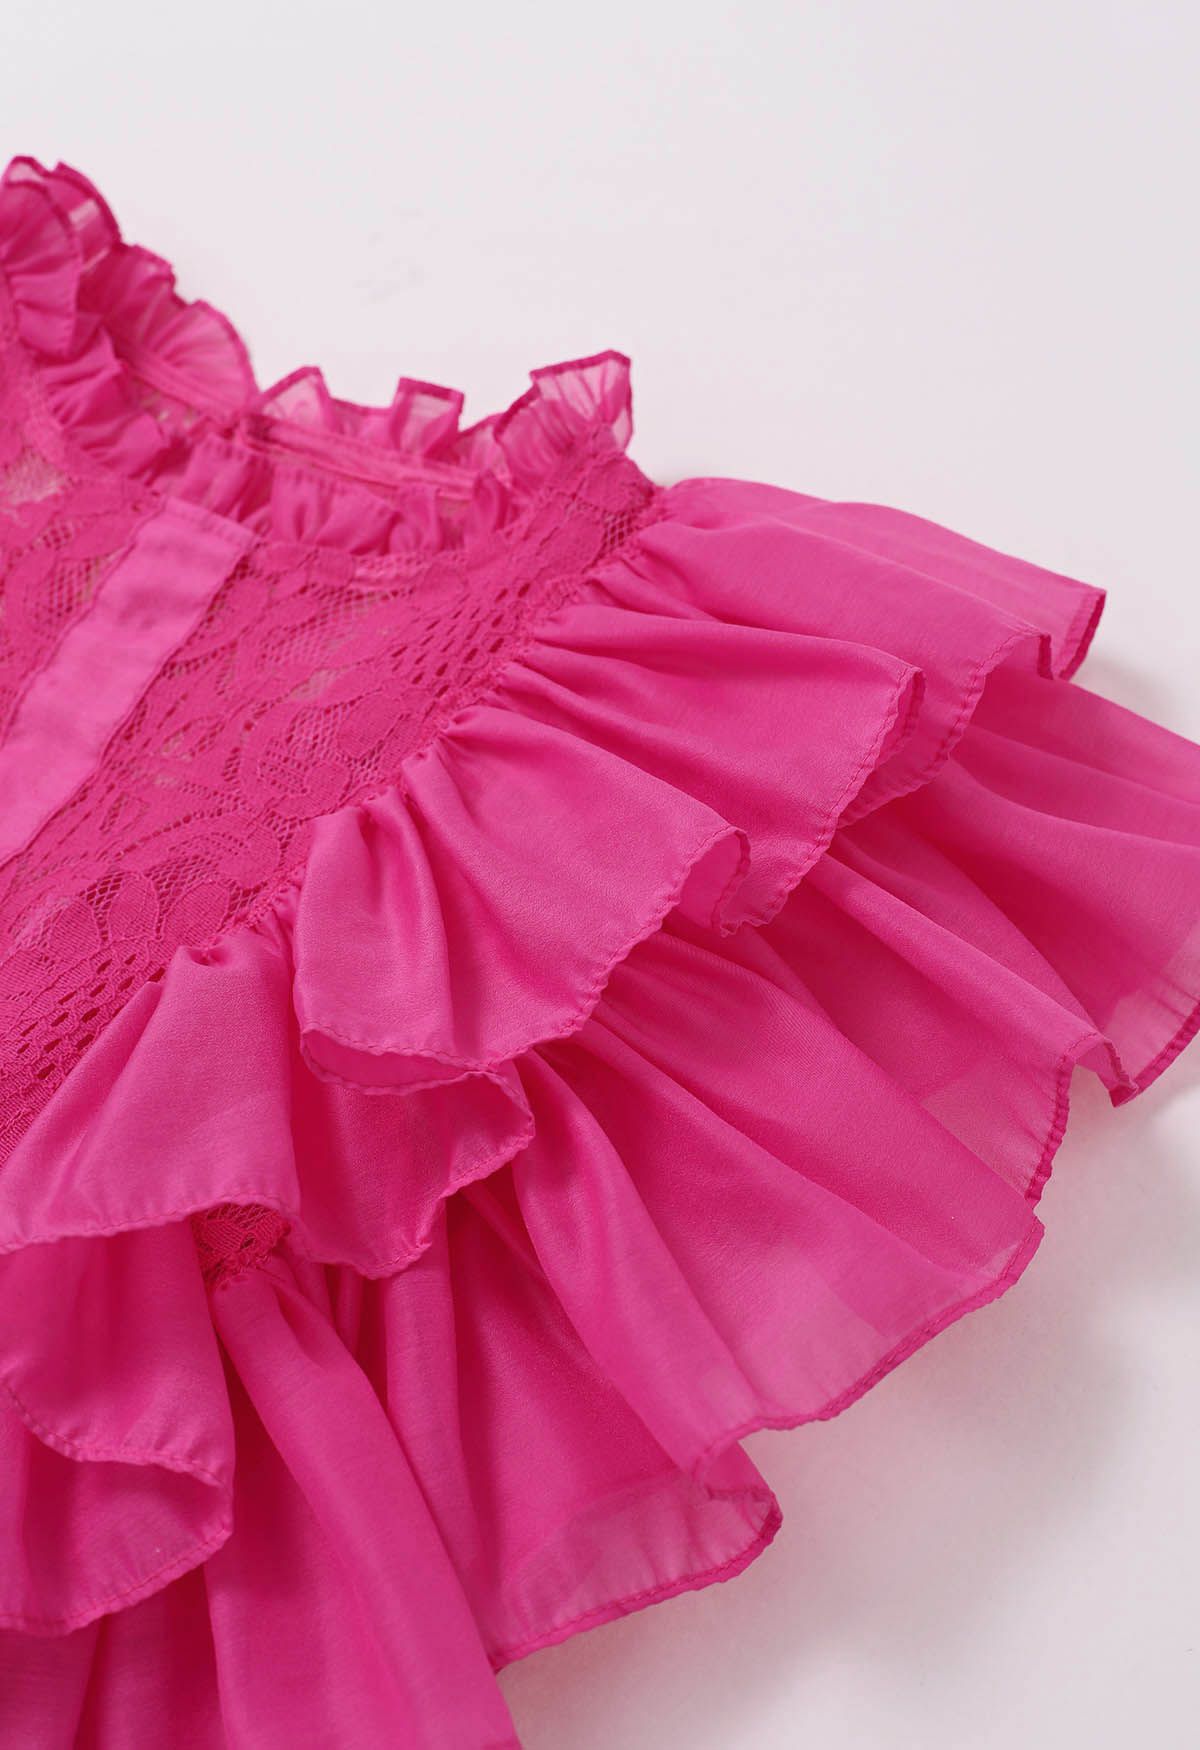 Tiered Ruffle Sleeveless Lace Crop Top in Magenta